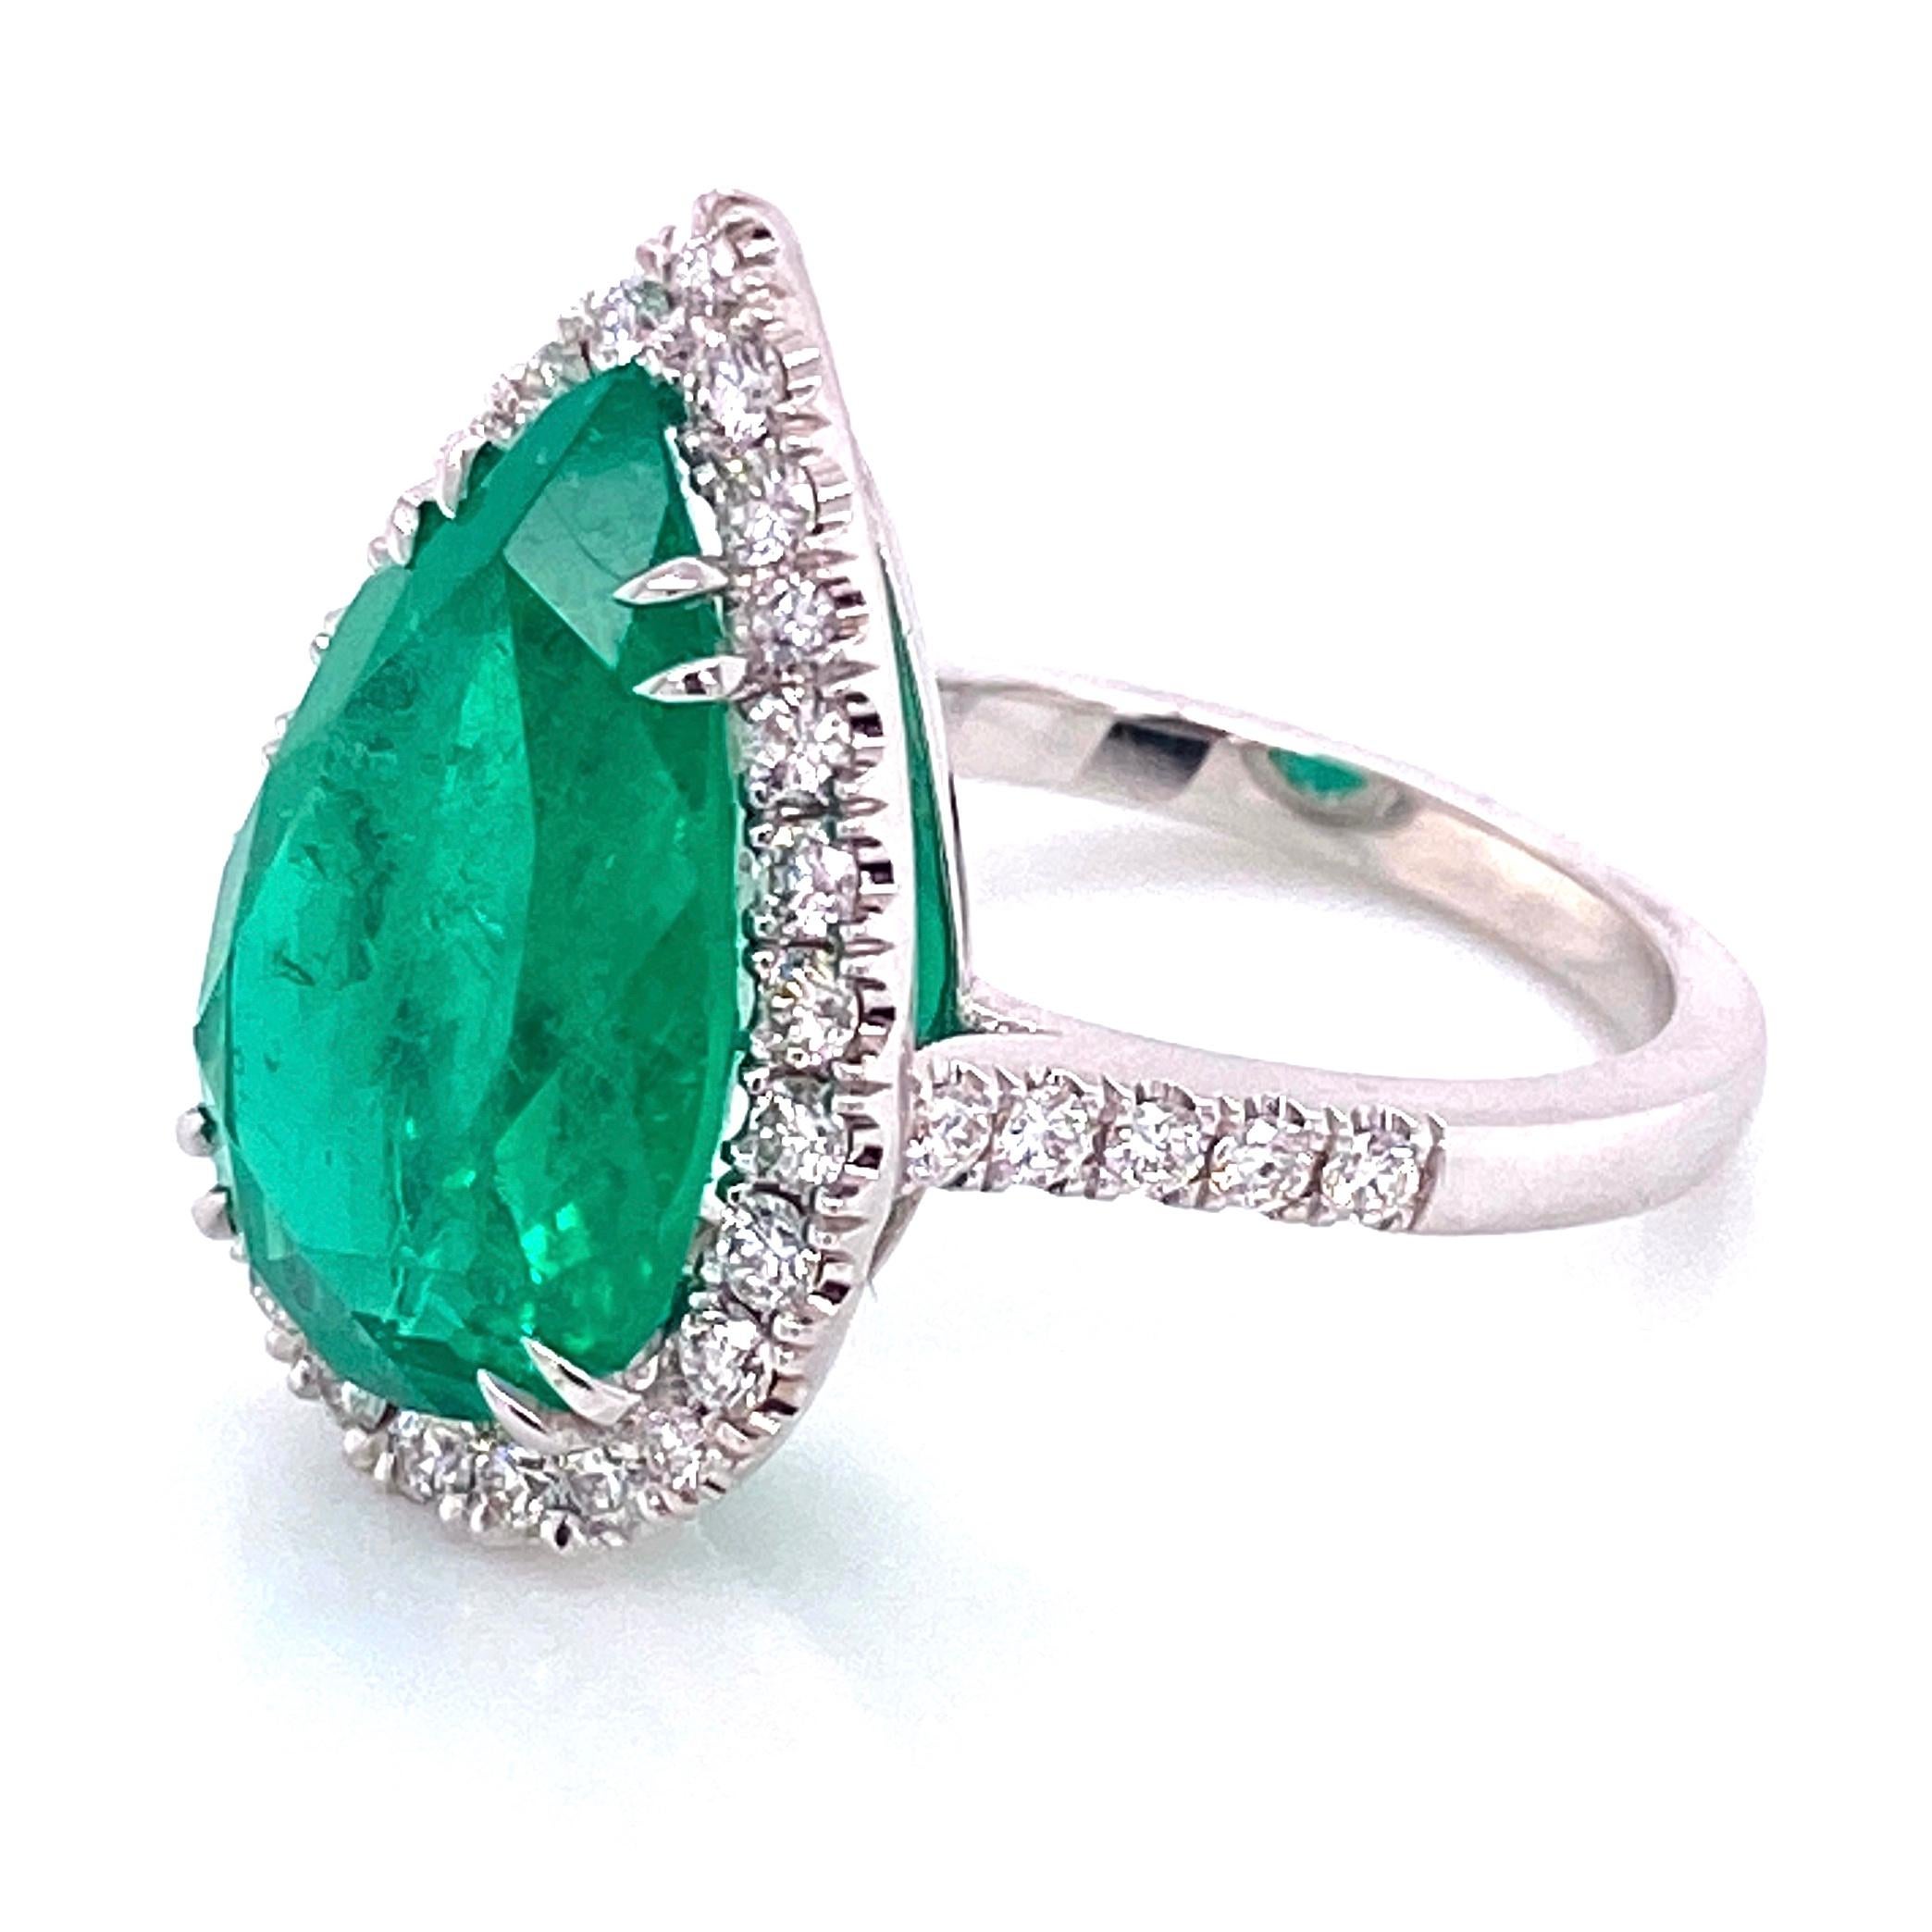 6.96 Carat Pear Shaped Emerald and Diamond Ring Estate Fine Jewelry In Excellent Condition For Sale In Montreal, QC